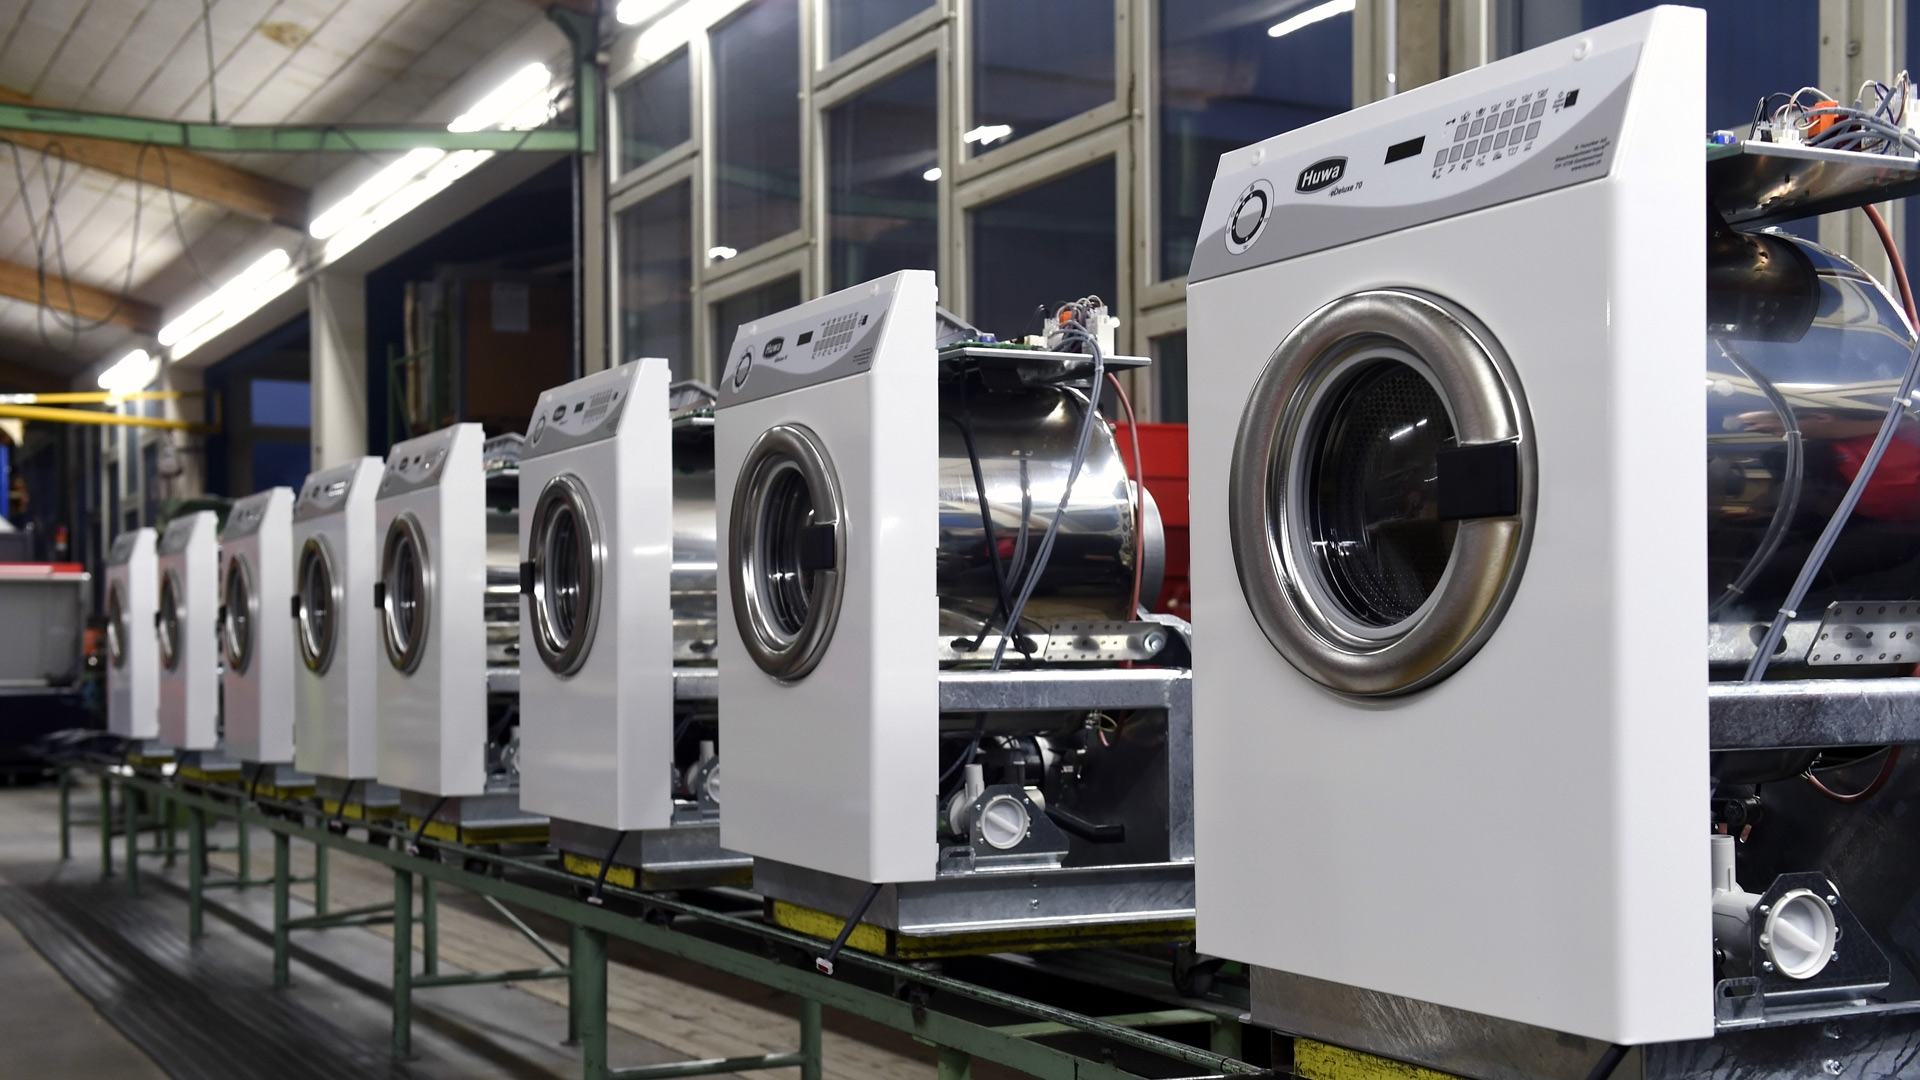 Washing machine, tumble dryer, and room air dryer from Huwa with patented innovative technology belongs to environmentally friendly technology. Produced in Switzerland.